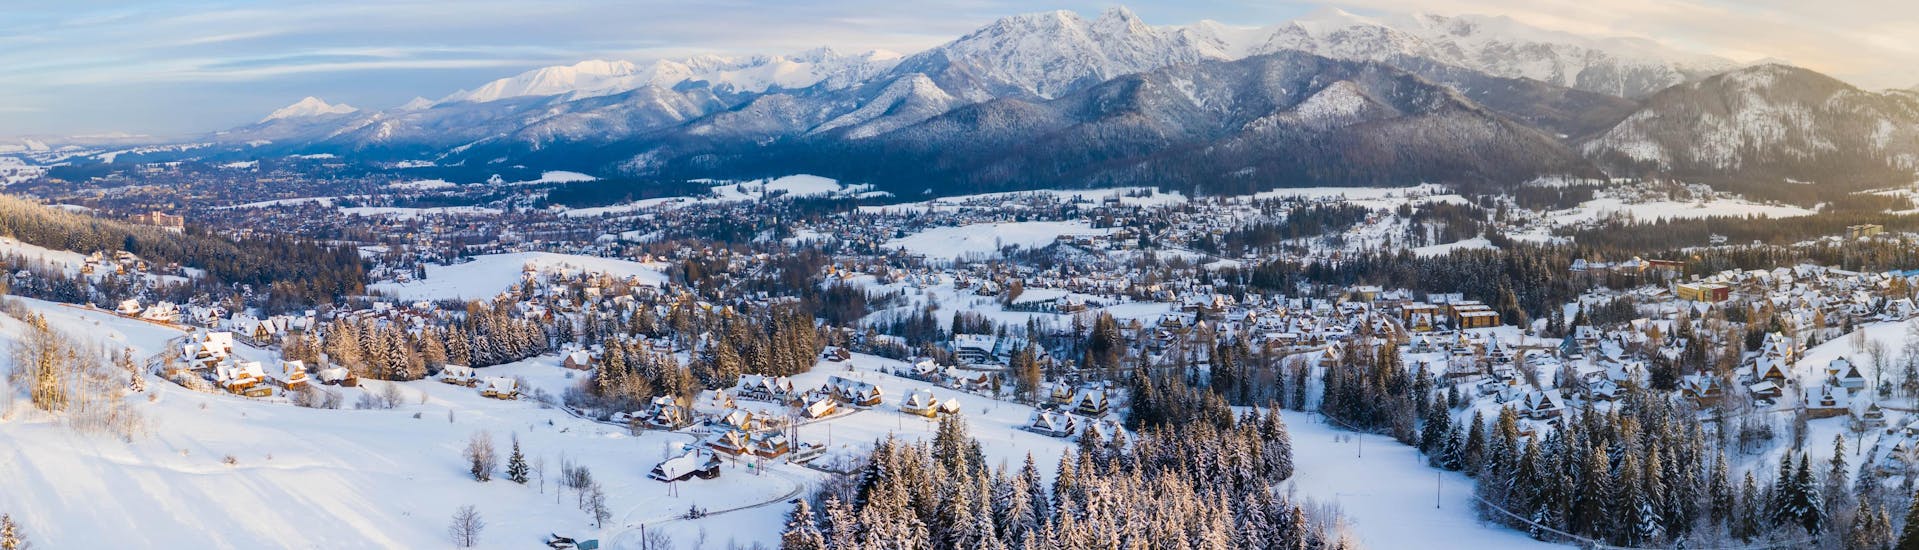 View of the snowy landscape of the village of Zakopane, where local ski schools offer their ski lessons.